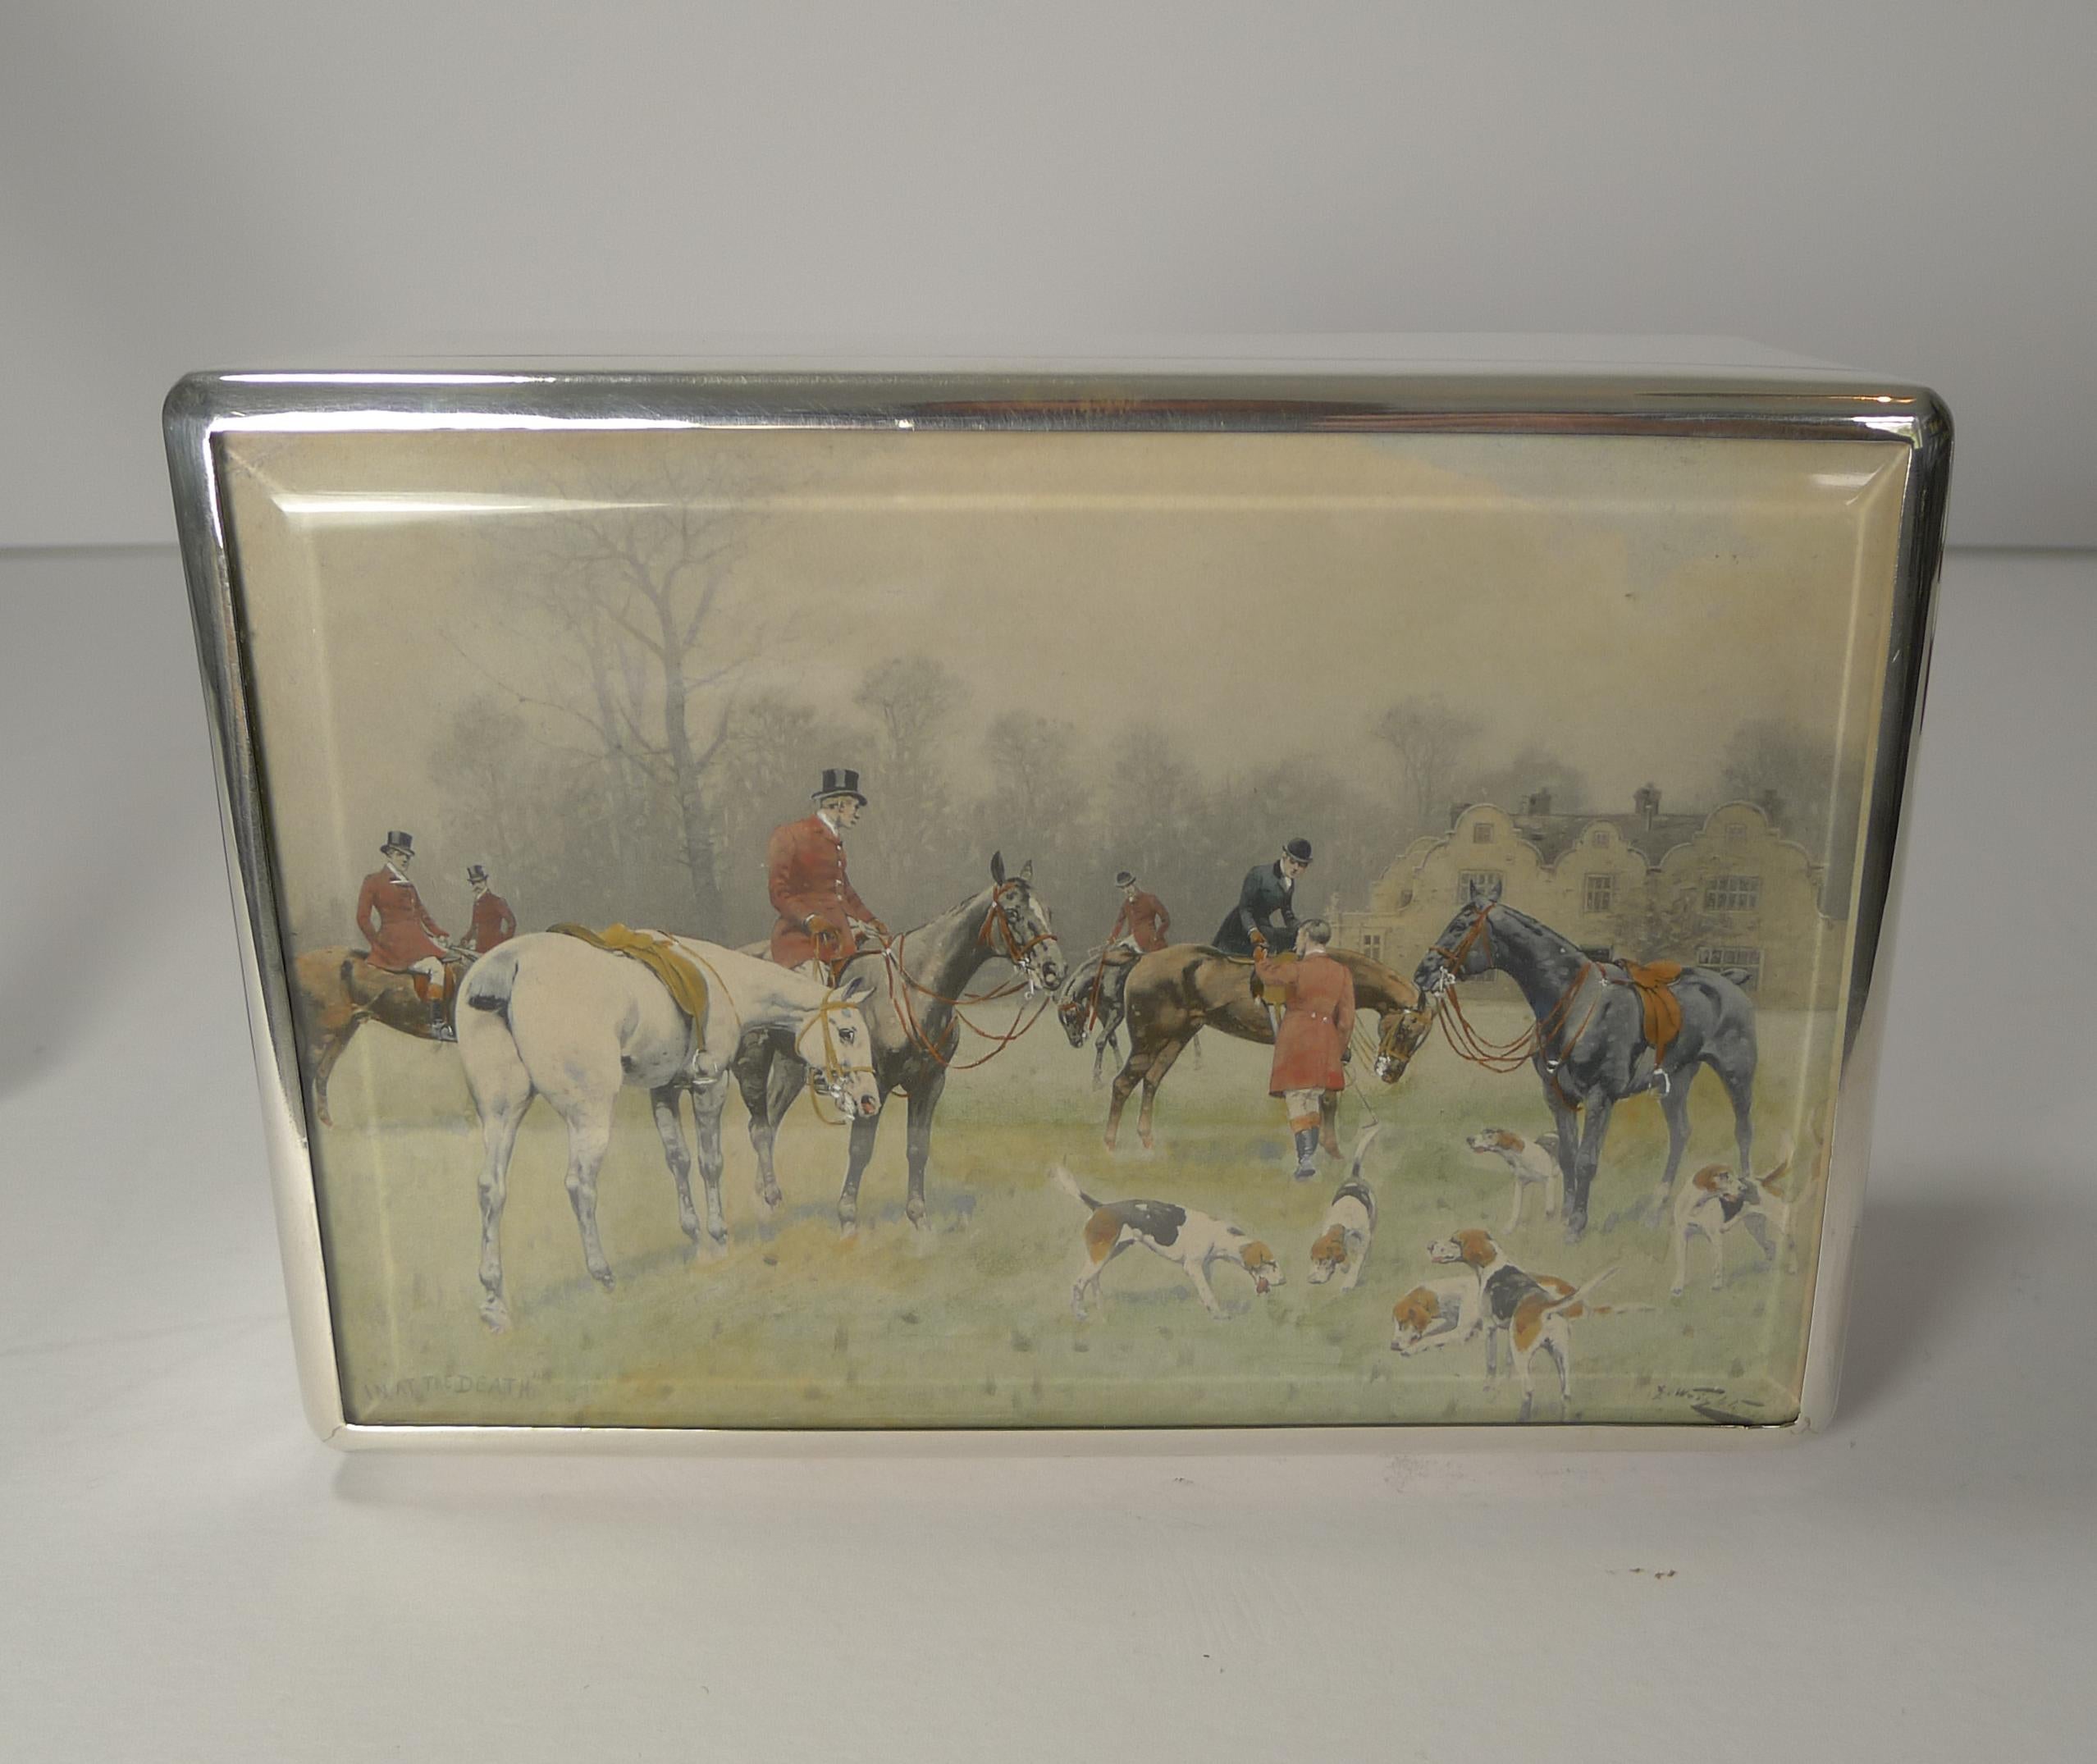 A top quality example of an early Edwardian cheroot or cigar box made from sterling silver with the original beveled glass lid protected the hand-colored George Wright print titled 